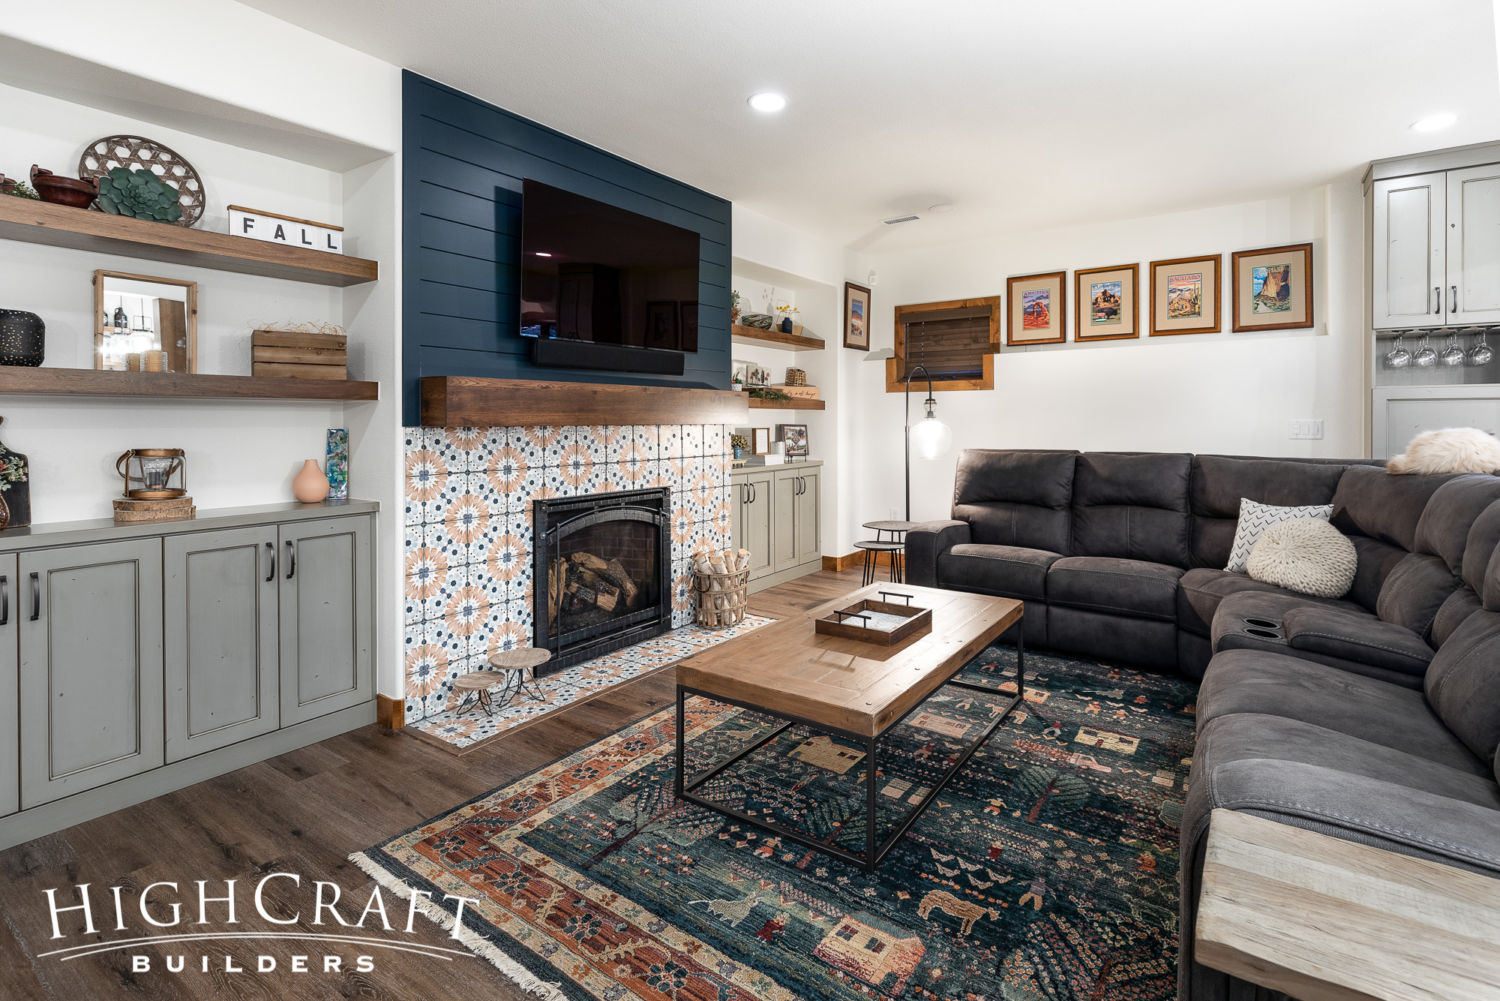 basement-finish-floral-pattern-tile-fireplace-surround-family-room-angle